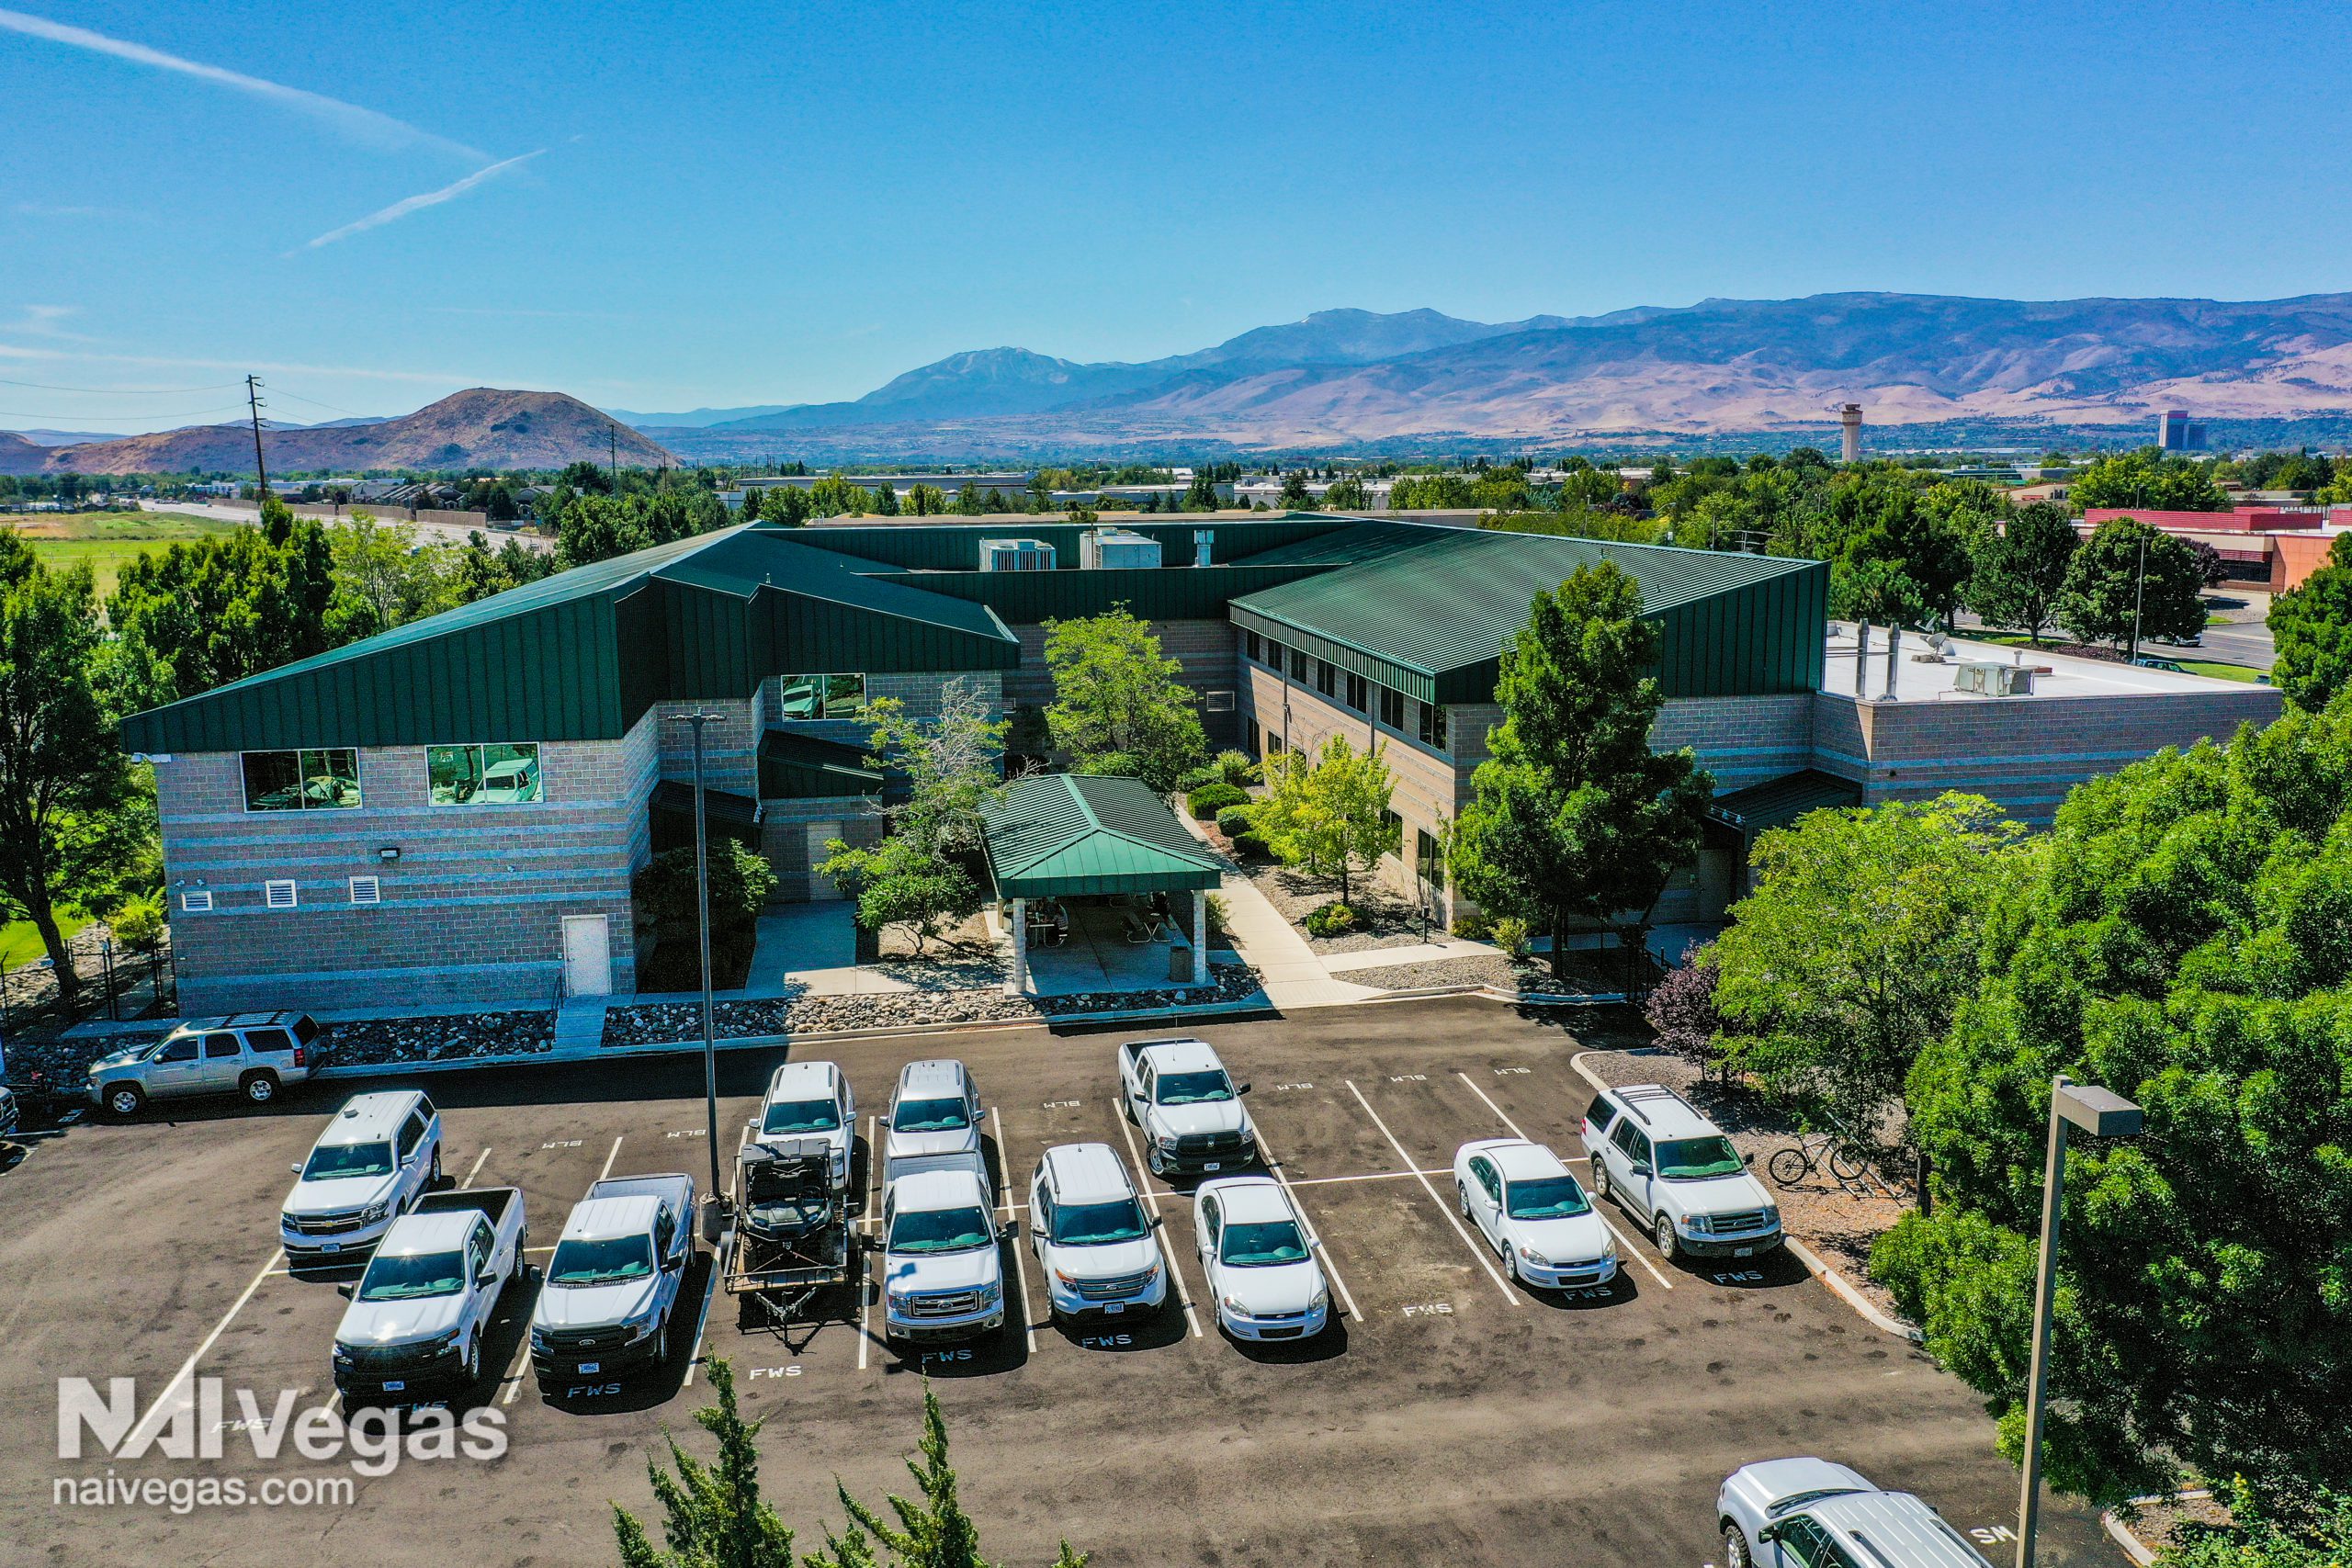 Professional Building in Reno - Parking lot view